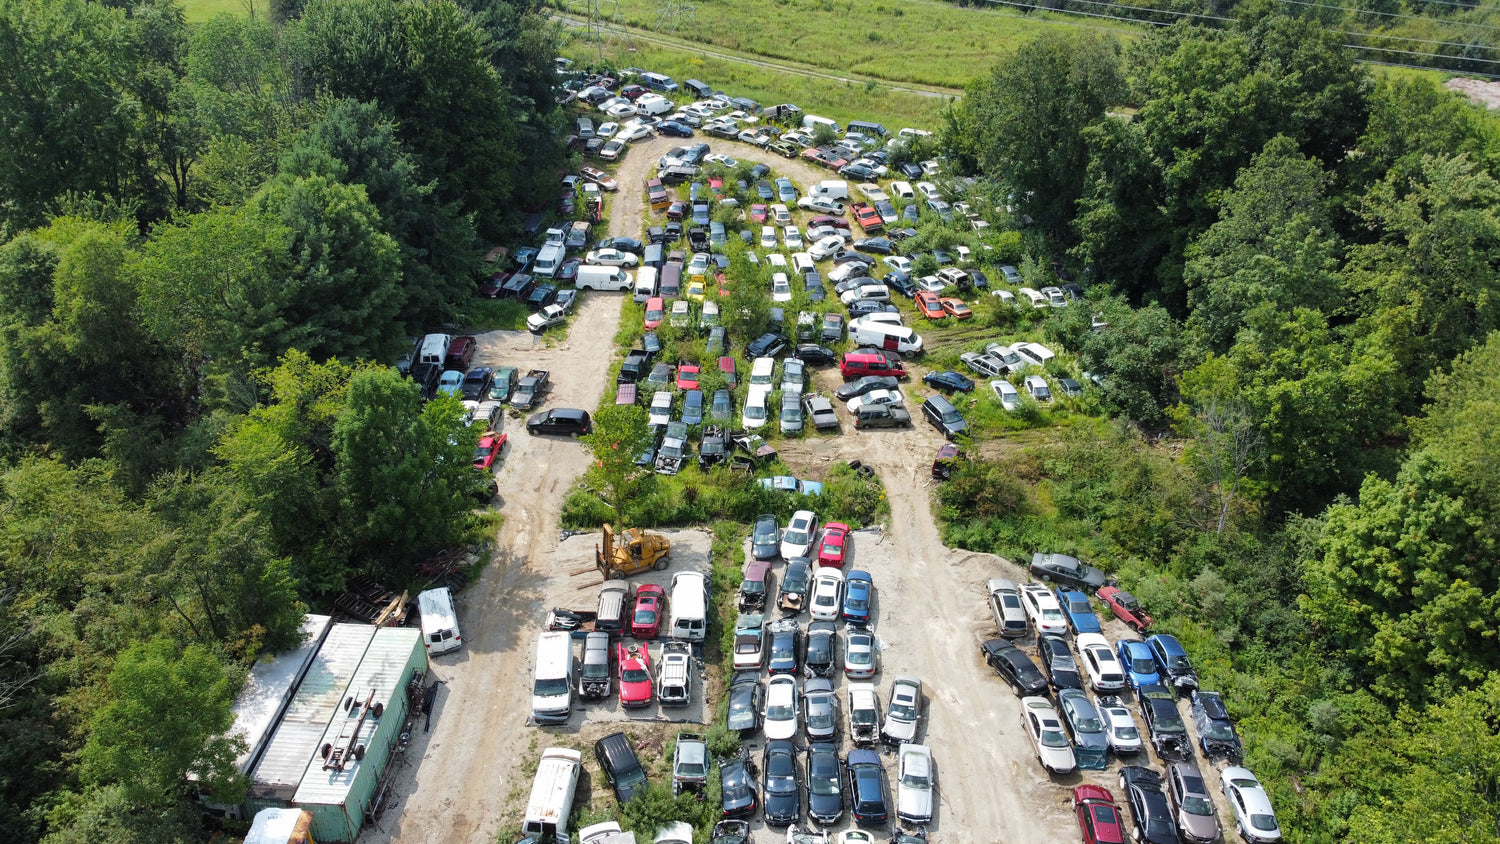 Ariel Drone Photo of Auto Recycling Center in Novelty, Oh at Vivander German